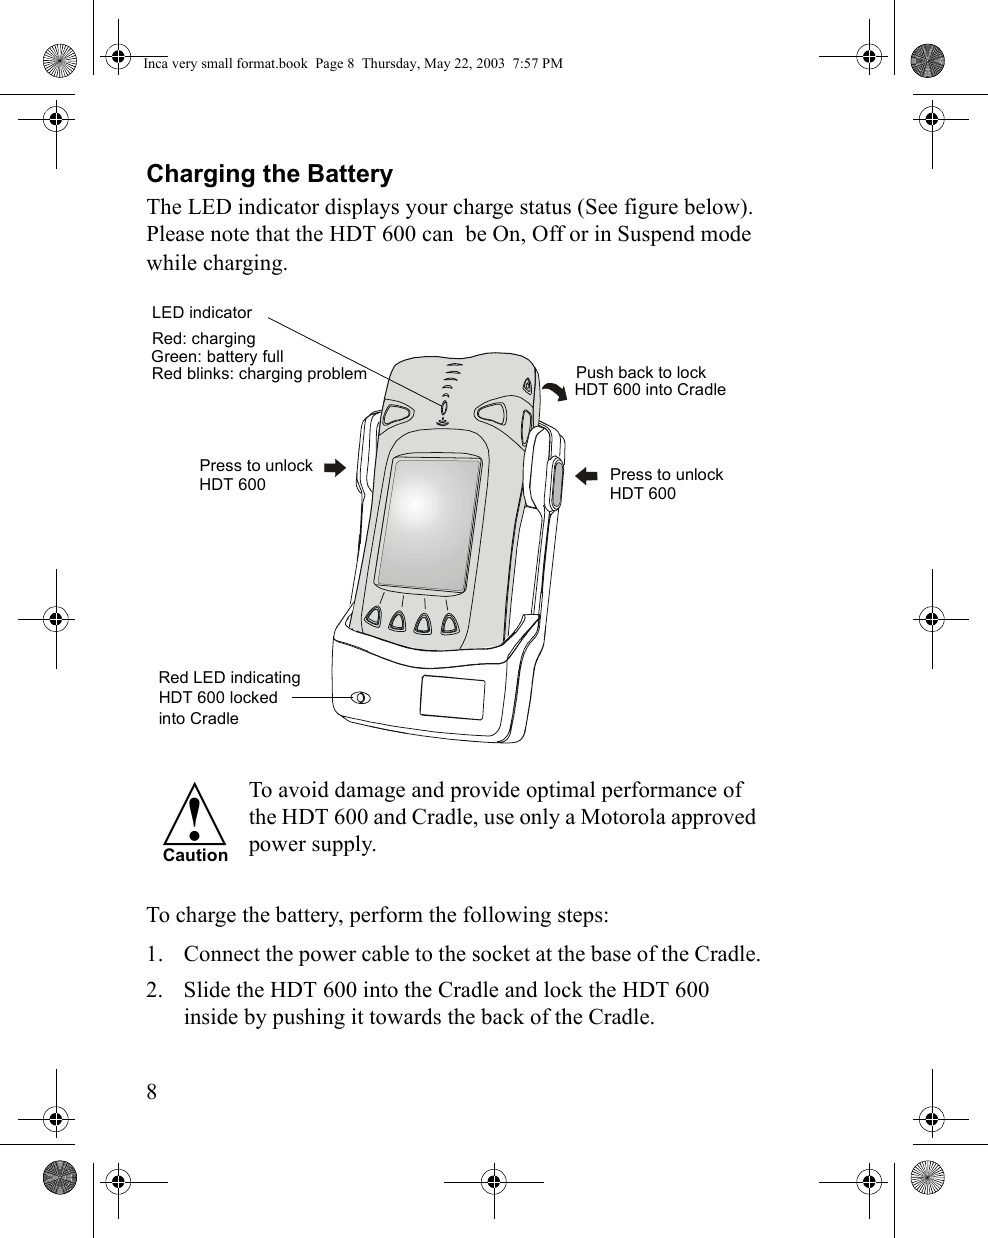 8Charging the BatteryThe LED indicator displays your charge status (See figure below). Please note that the HDT 600 can  be On, Off or in Suspend mode while charging. To avoid damage and provide optimal performance of the HDT 600 and Cradle, use only a Motorola approved power supply.To charge the battery, perform the following steps:1. Connect the power cable to the socket at the base of the Cradle.2. Slide the HDT 600 into the Cradle and lock the HDT 600 inside by pushing it towards the back of the Cradle.Press to unlock Red LED indicating HDT 600 lockedPush back to lock HDT 600 into Cradle     into CradlePress to unlockRed: charging Green: battery full  Red blinks: charging problem   LED indicator HDT 600    HDT 600  !CautionInca very small format.book  Page 8  Thursday, May 22, 2003  7:57 PM